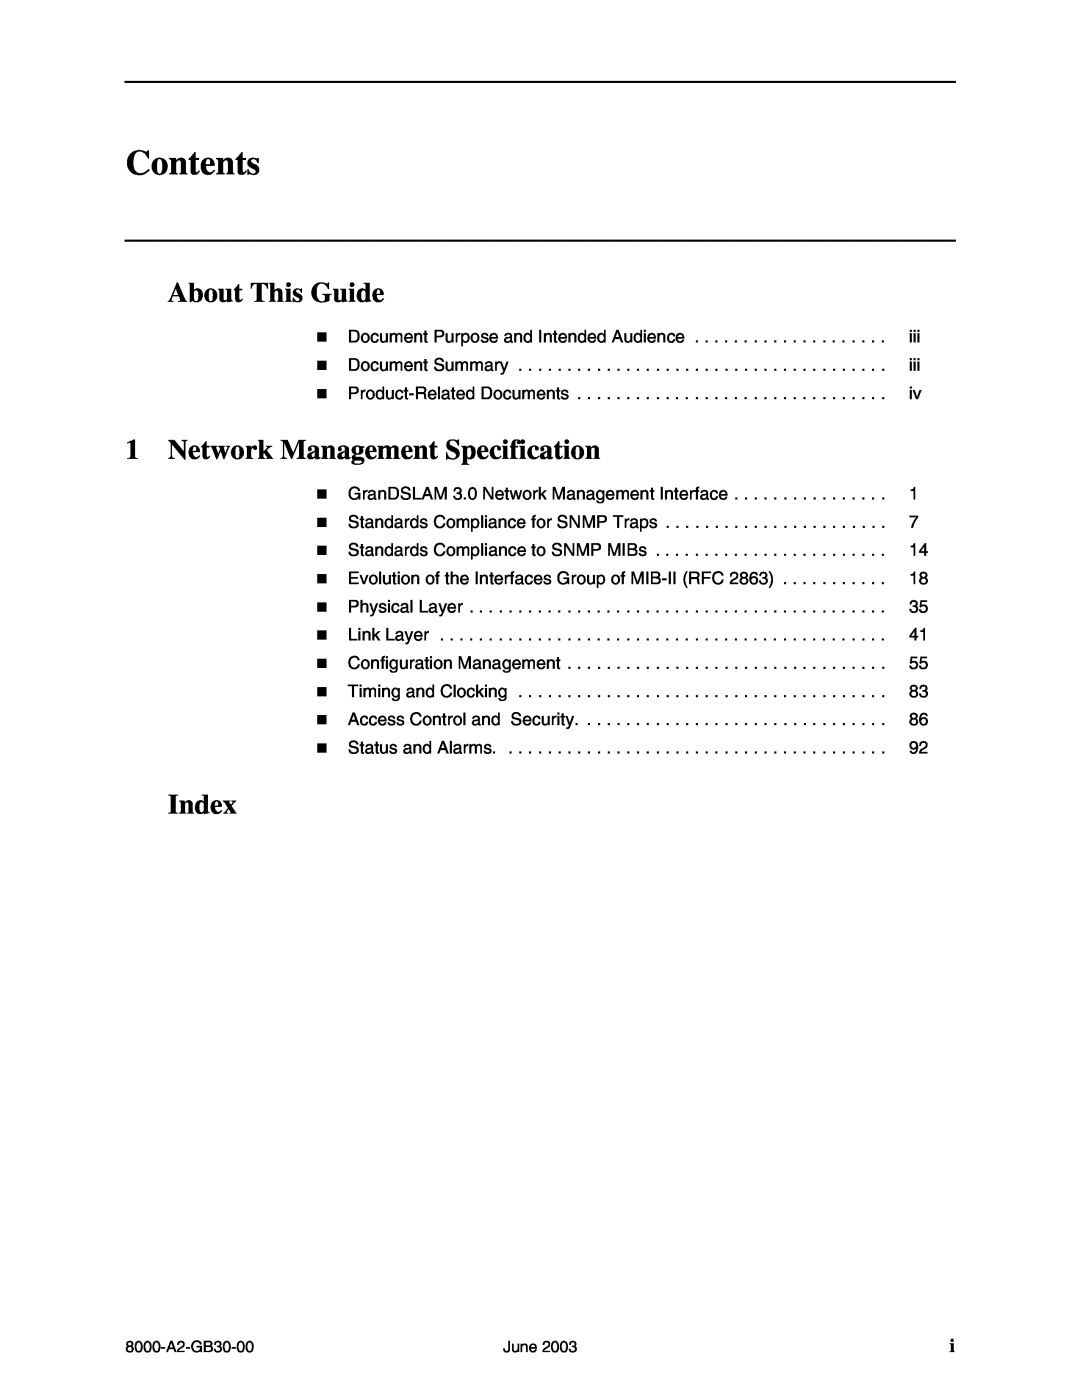 Paradyne 8620, 8820 manual Contents, About This Guide, Network Management Specification, Index 